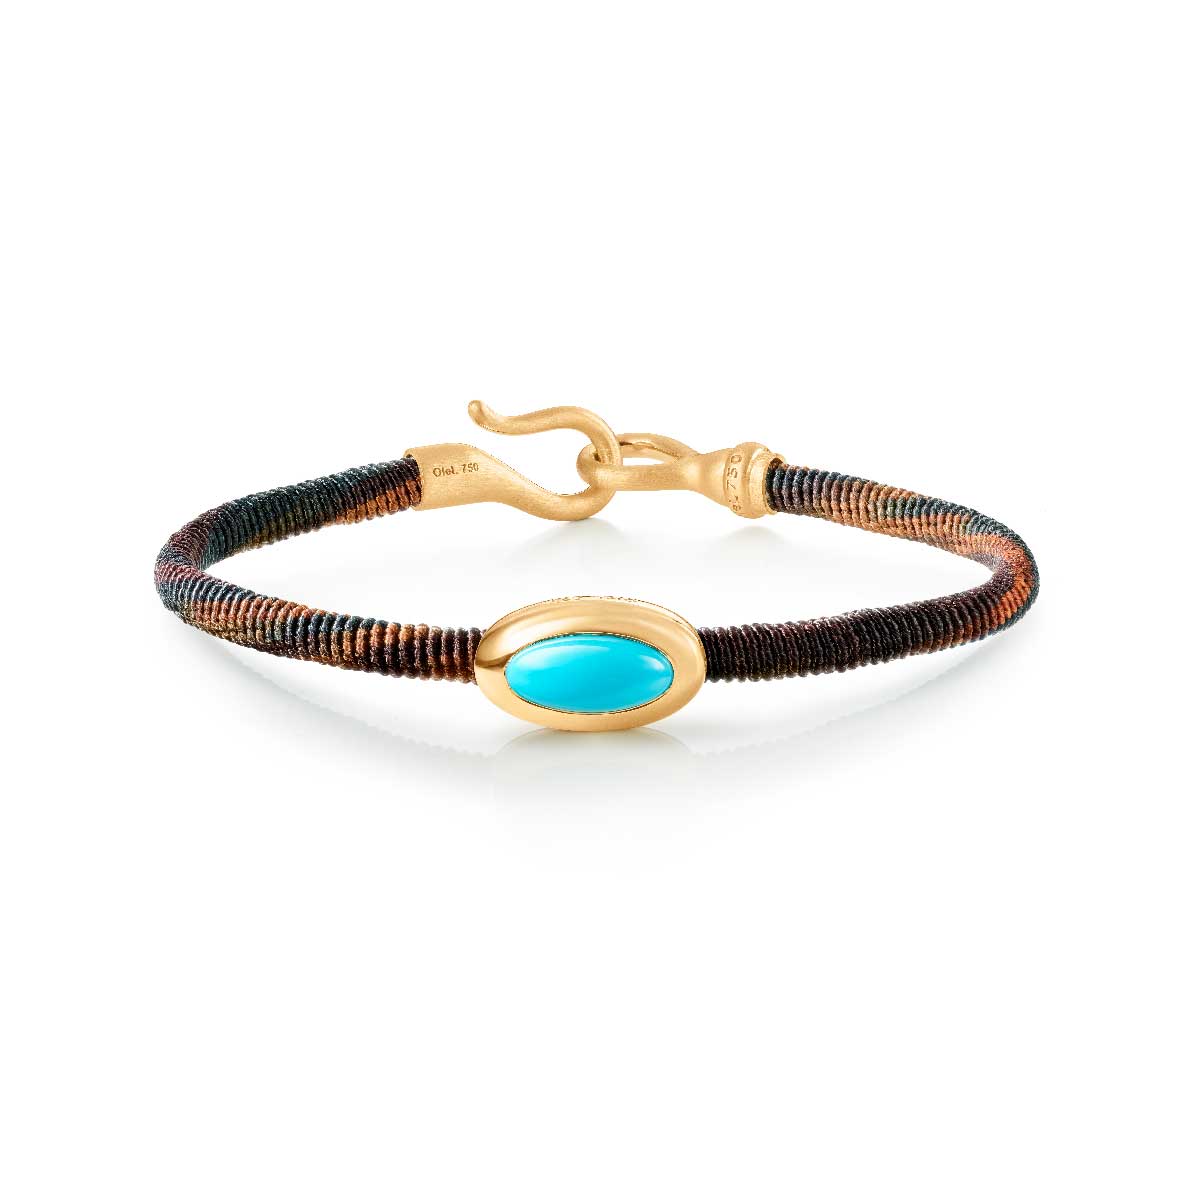 Turquoise life bracelet with 18ct gold